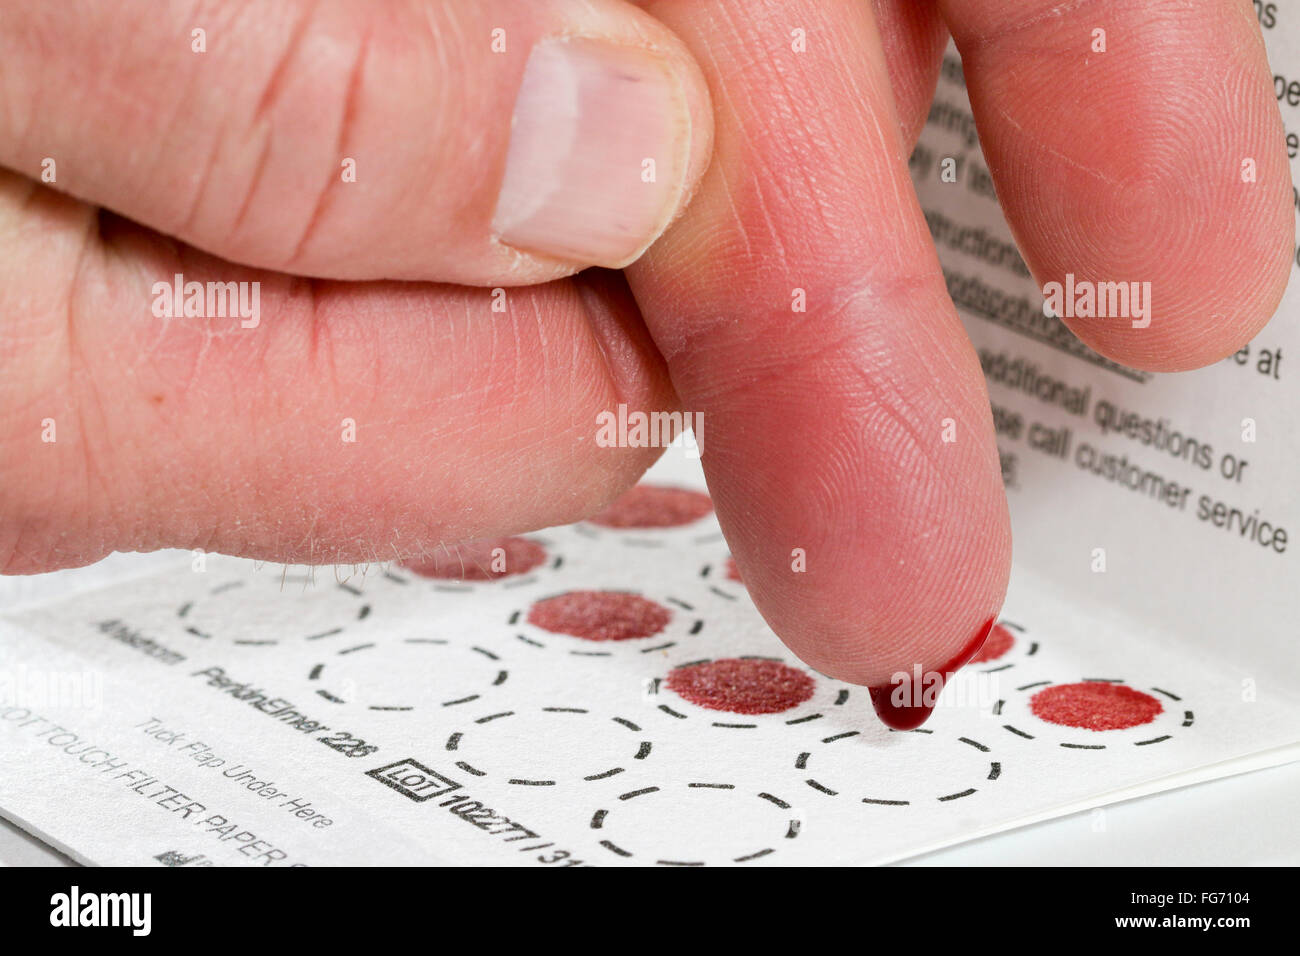 Home blood test. Depositing blood on filter paper. Stock Photo